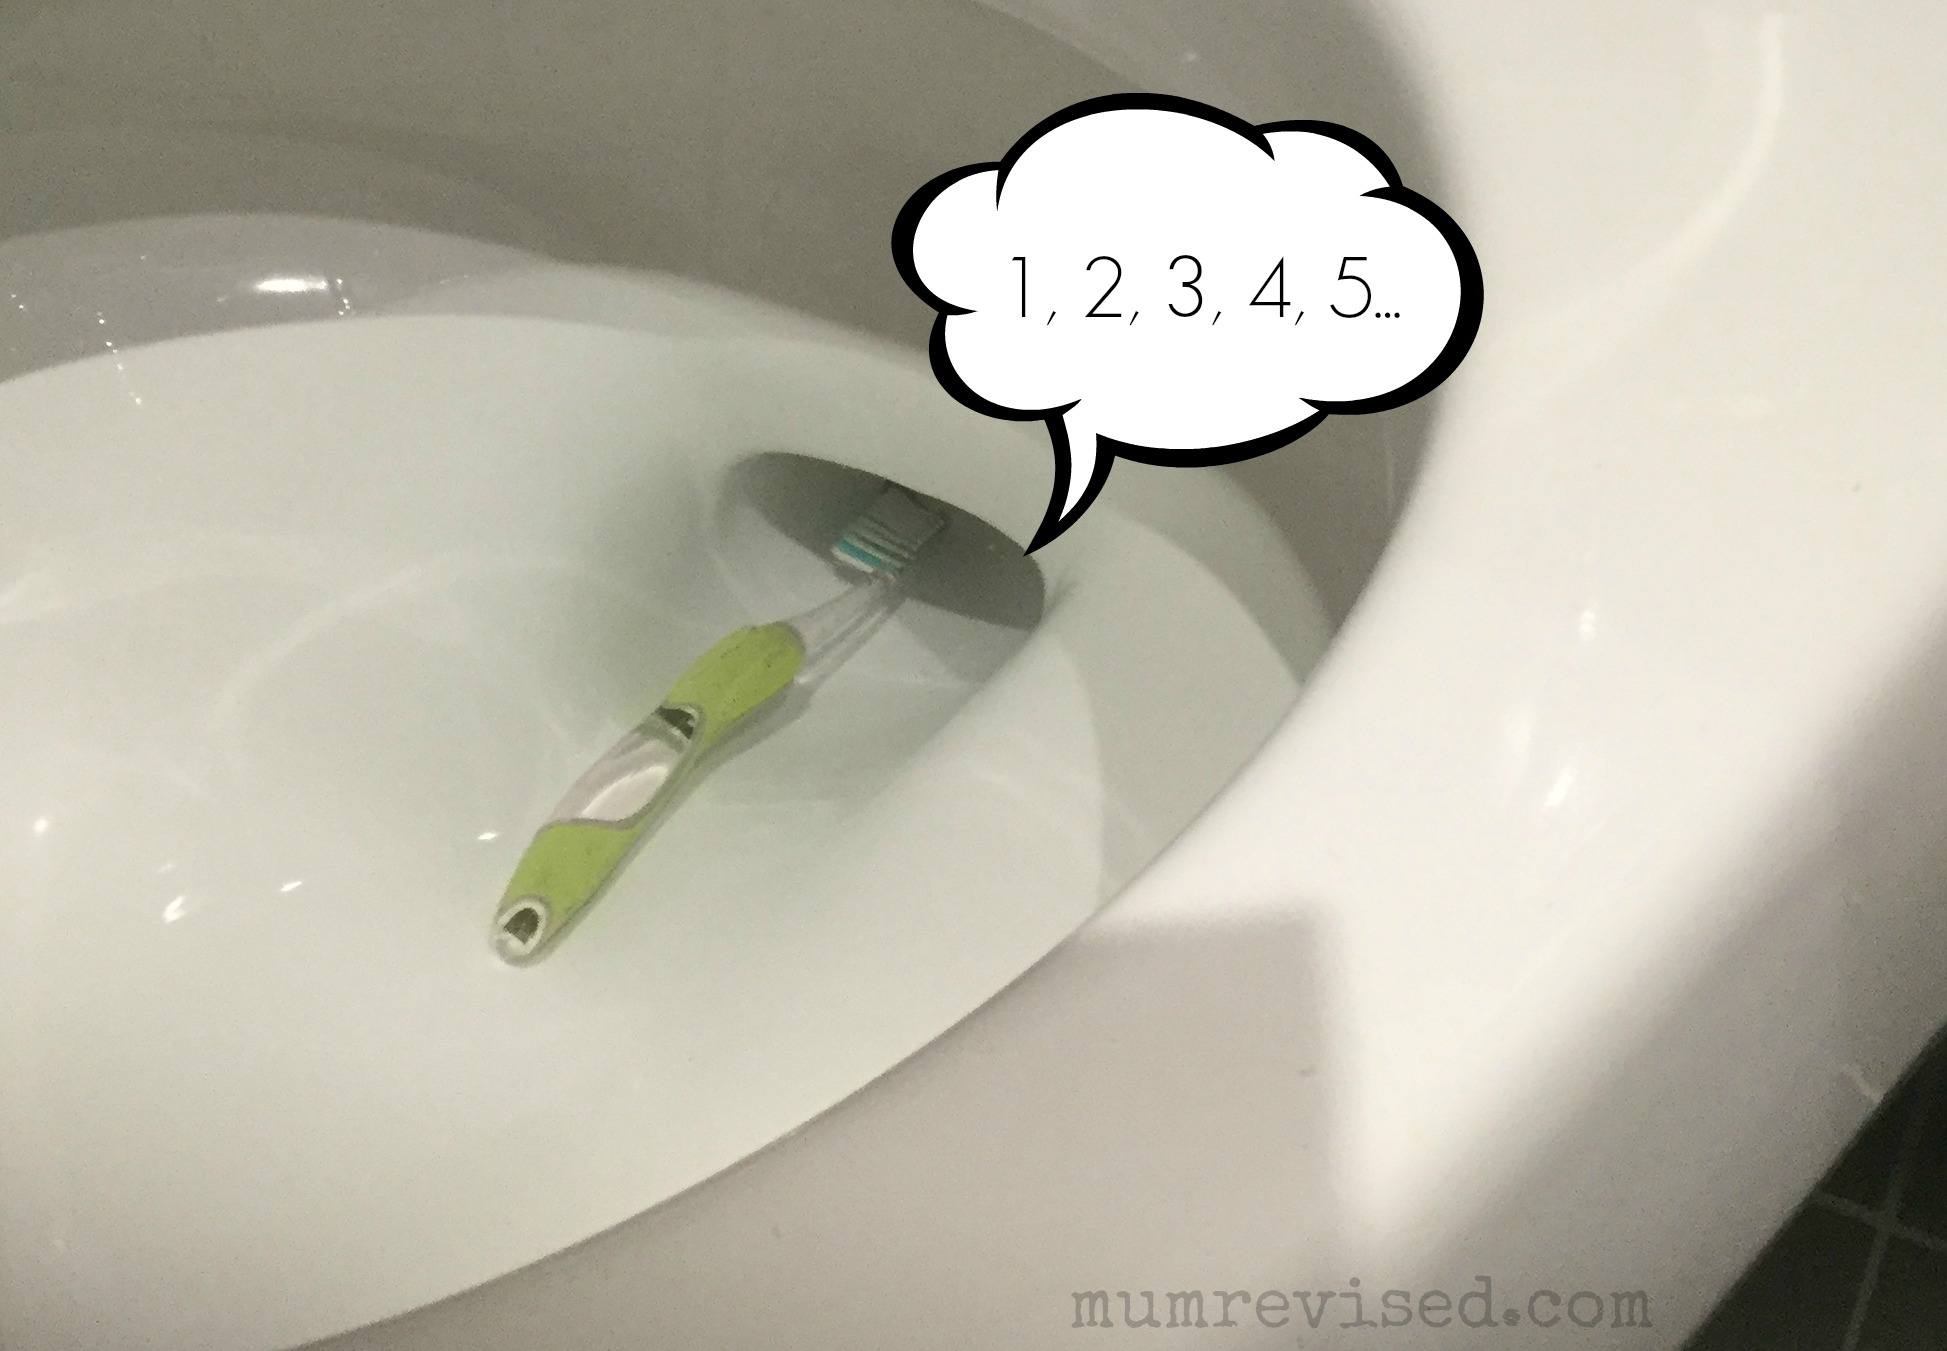 The 5-Second Rule Explained (aka The 5-Seconds Does Not Appy to Toilets)